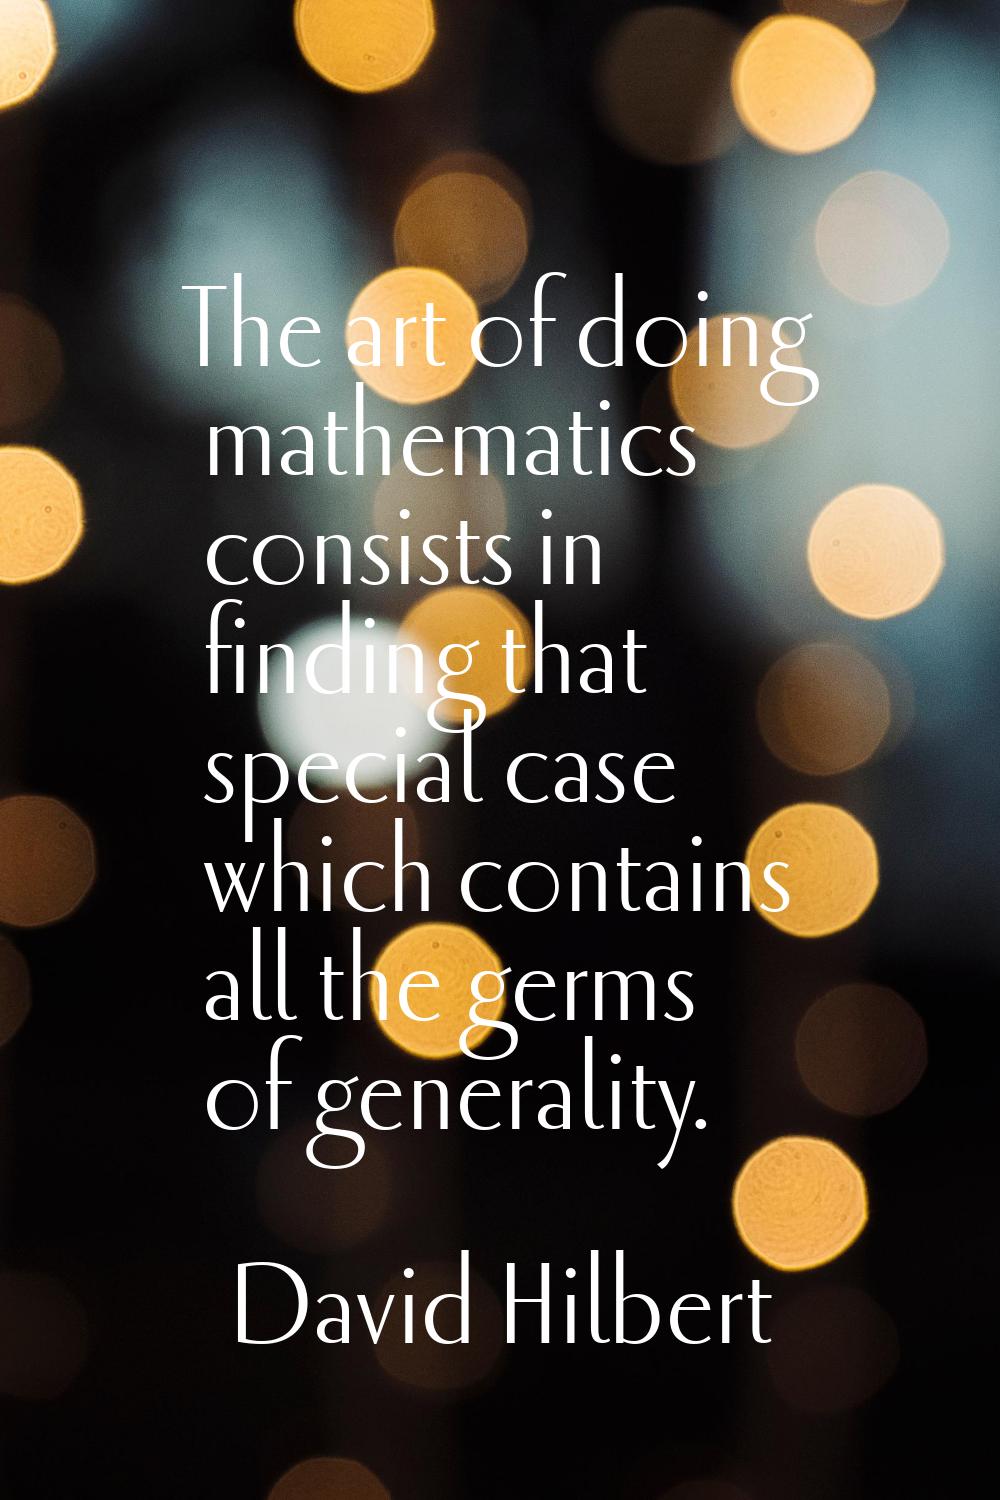 The art of doing mathematics consists in finding that special case which contains all the germs of 